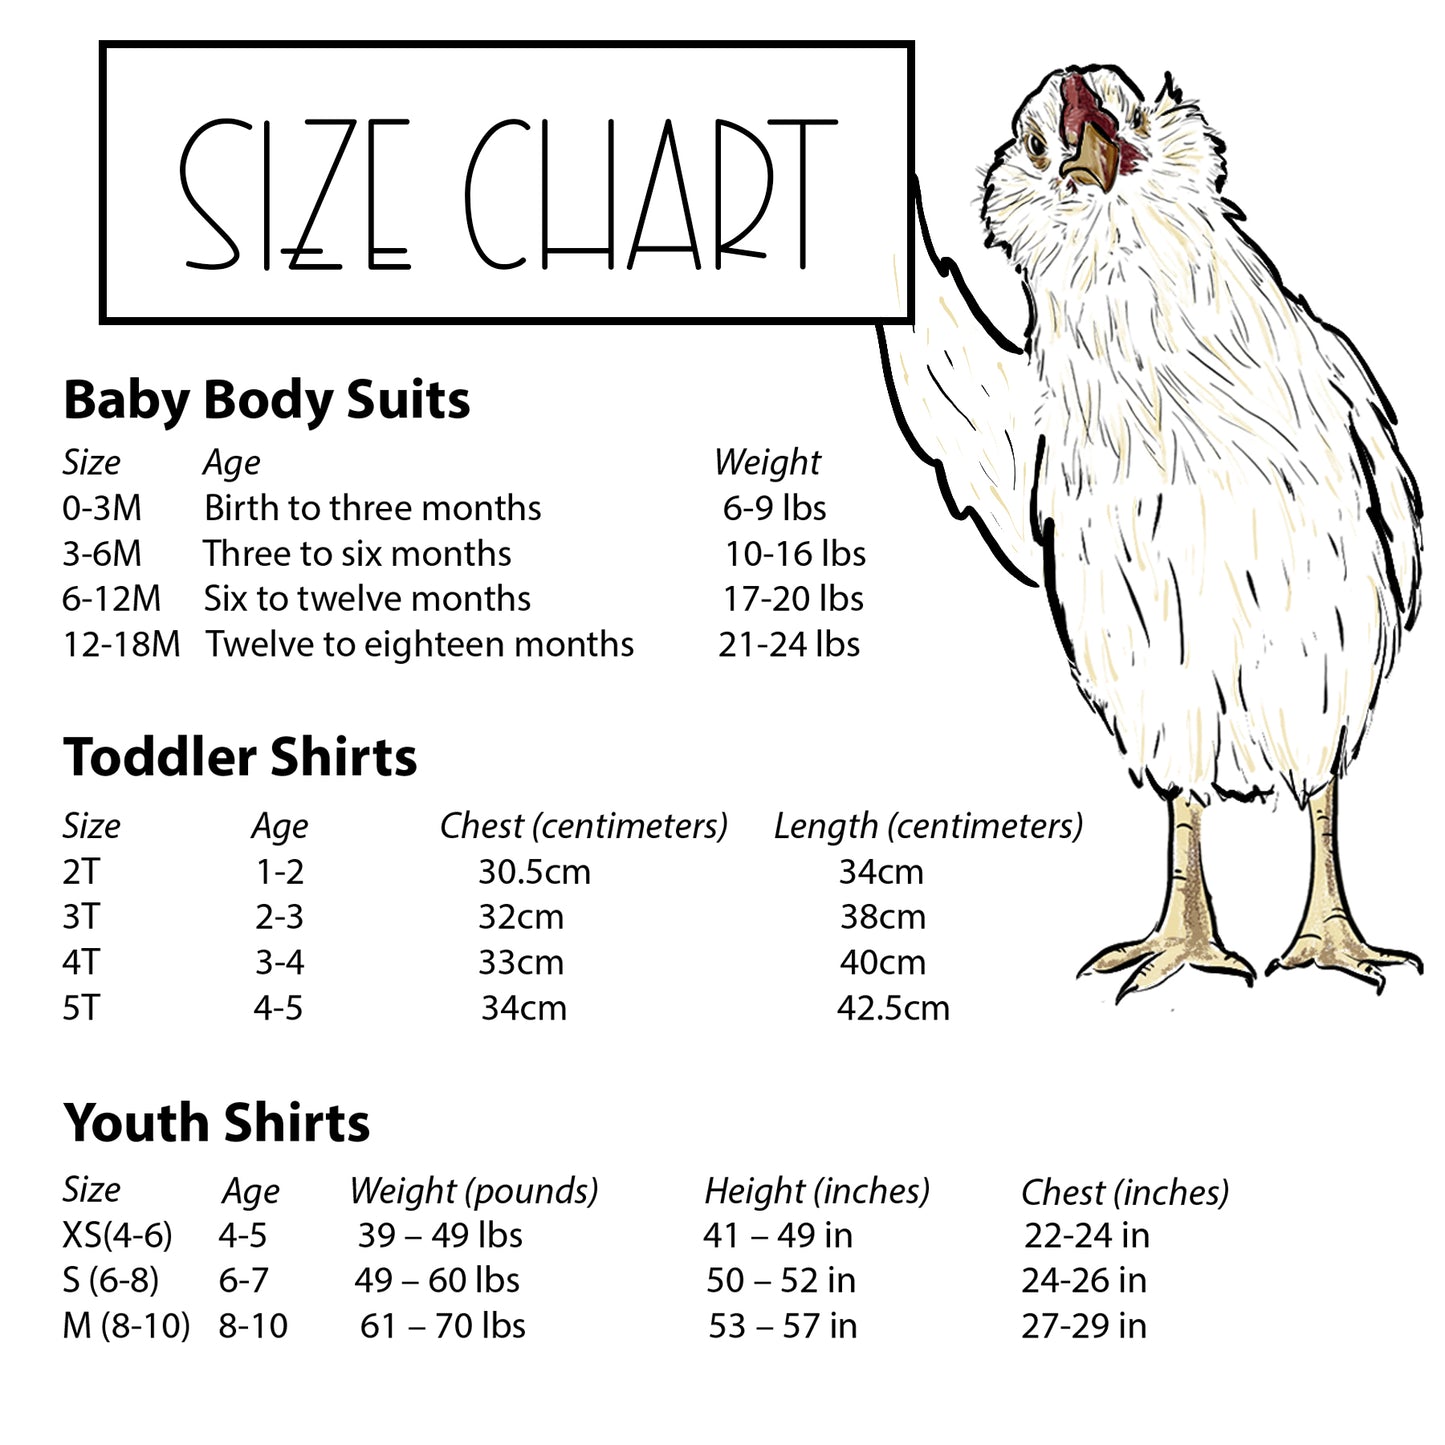 "I Need Space" chicken toddler/youth tee | Farm animals in Space Tee